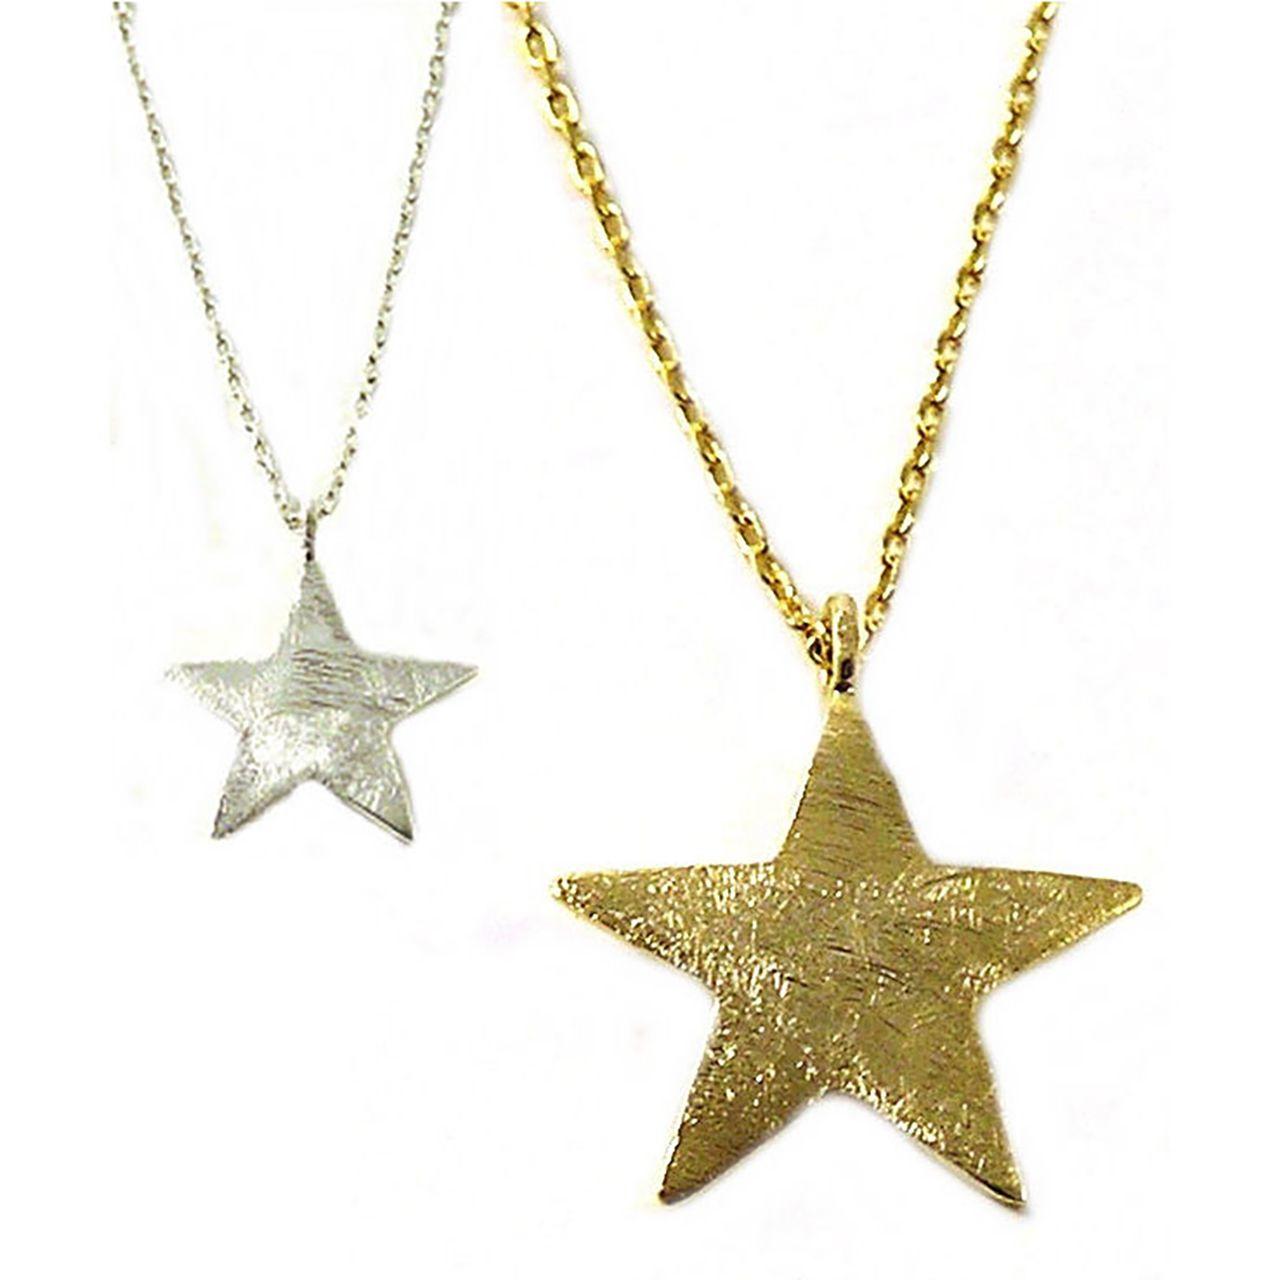 Twinkle, Twinkle Little Bright Star Necklaces on A Chain